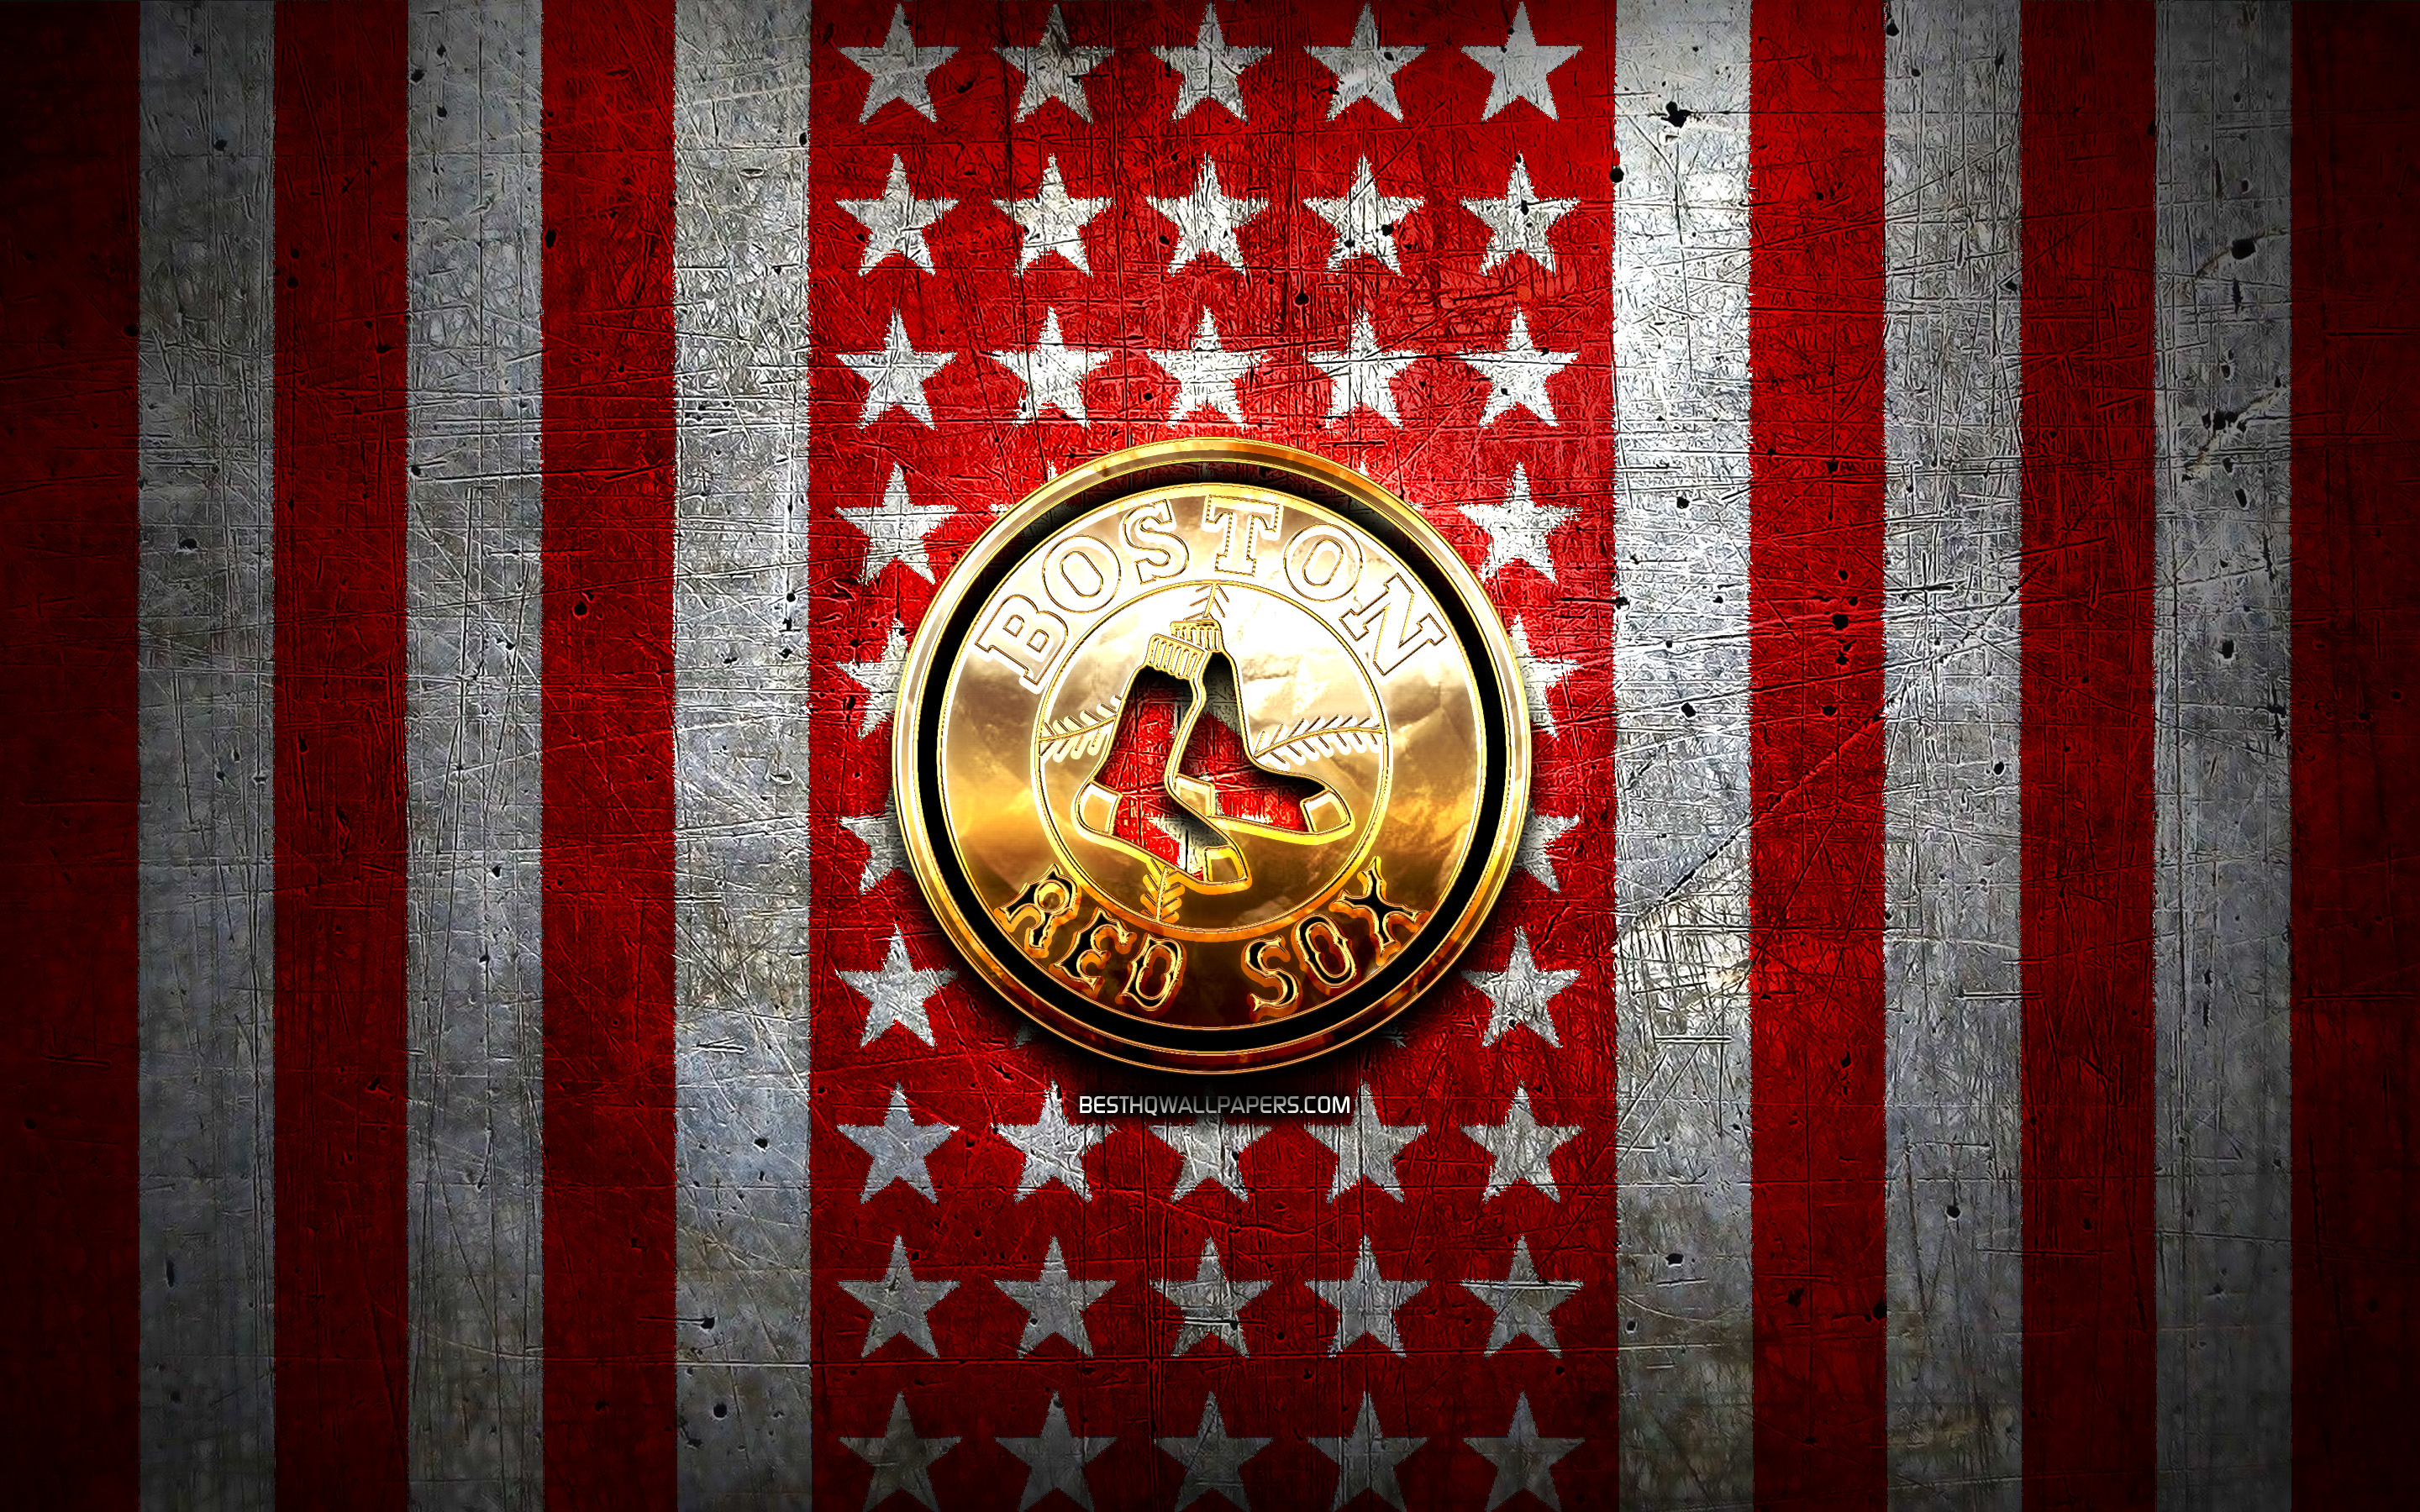 Download wallpaper Boston Red Sox flag, MLB, red white metal background, american baseball team, Boston Red Sox logo, USA, baseball, Boston Red Sox, golden logo for desktop with resolution 2880x1800. High Quality